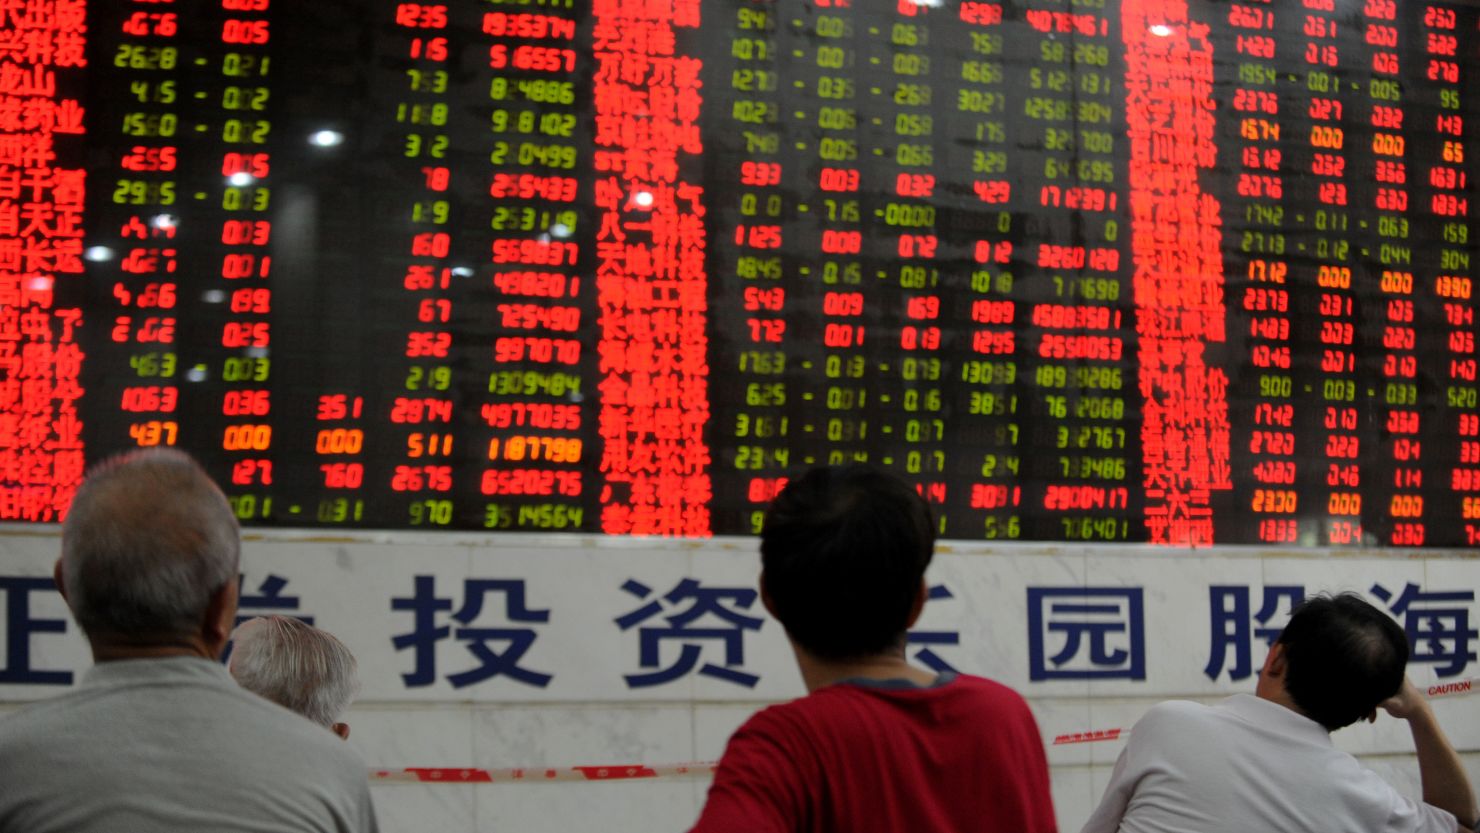 Chinese stock investors check their share prices at a security firm in Wuhan.